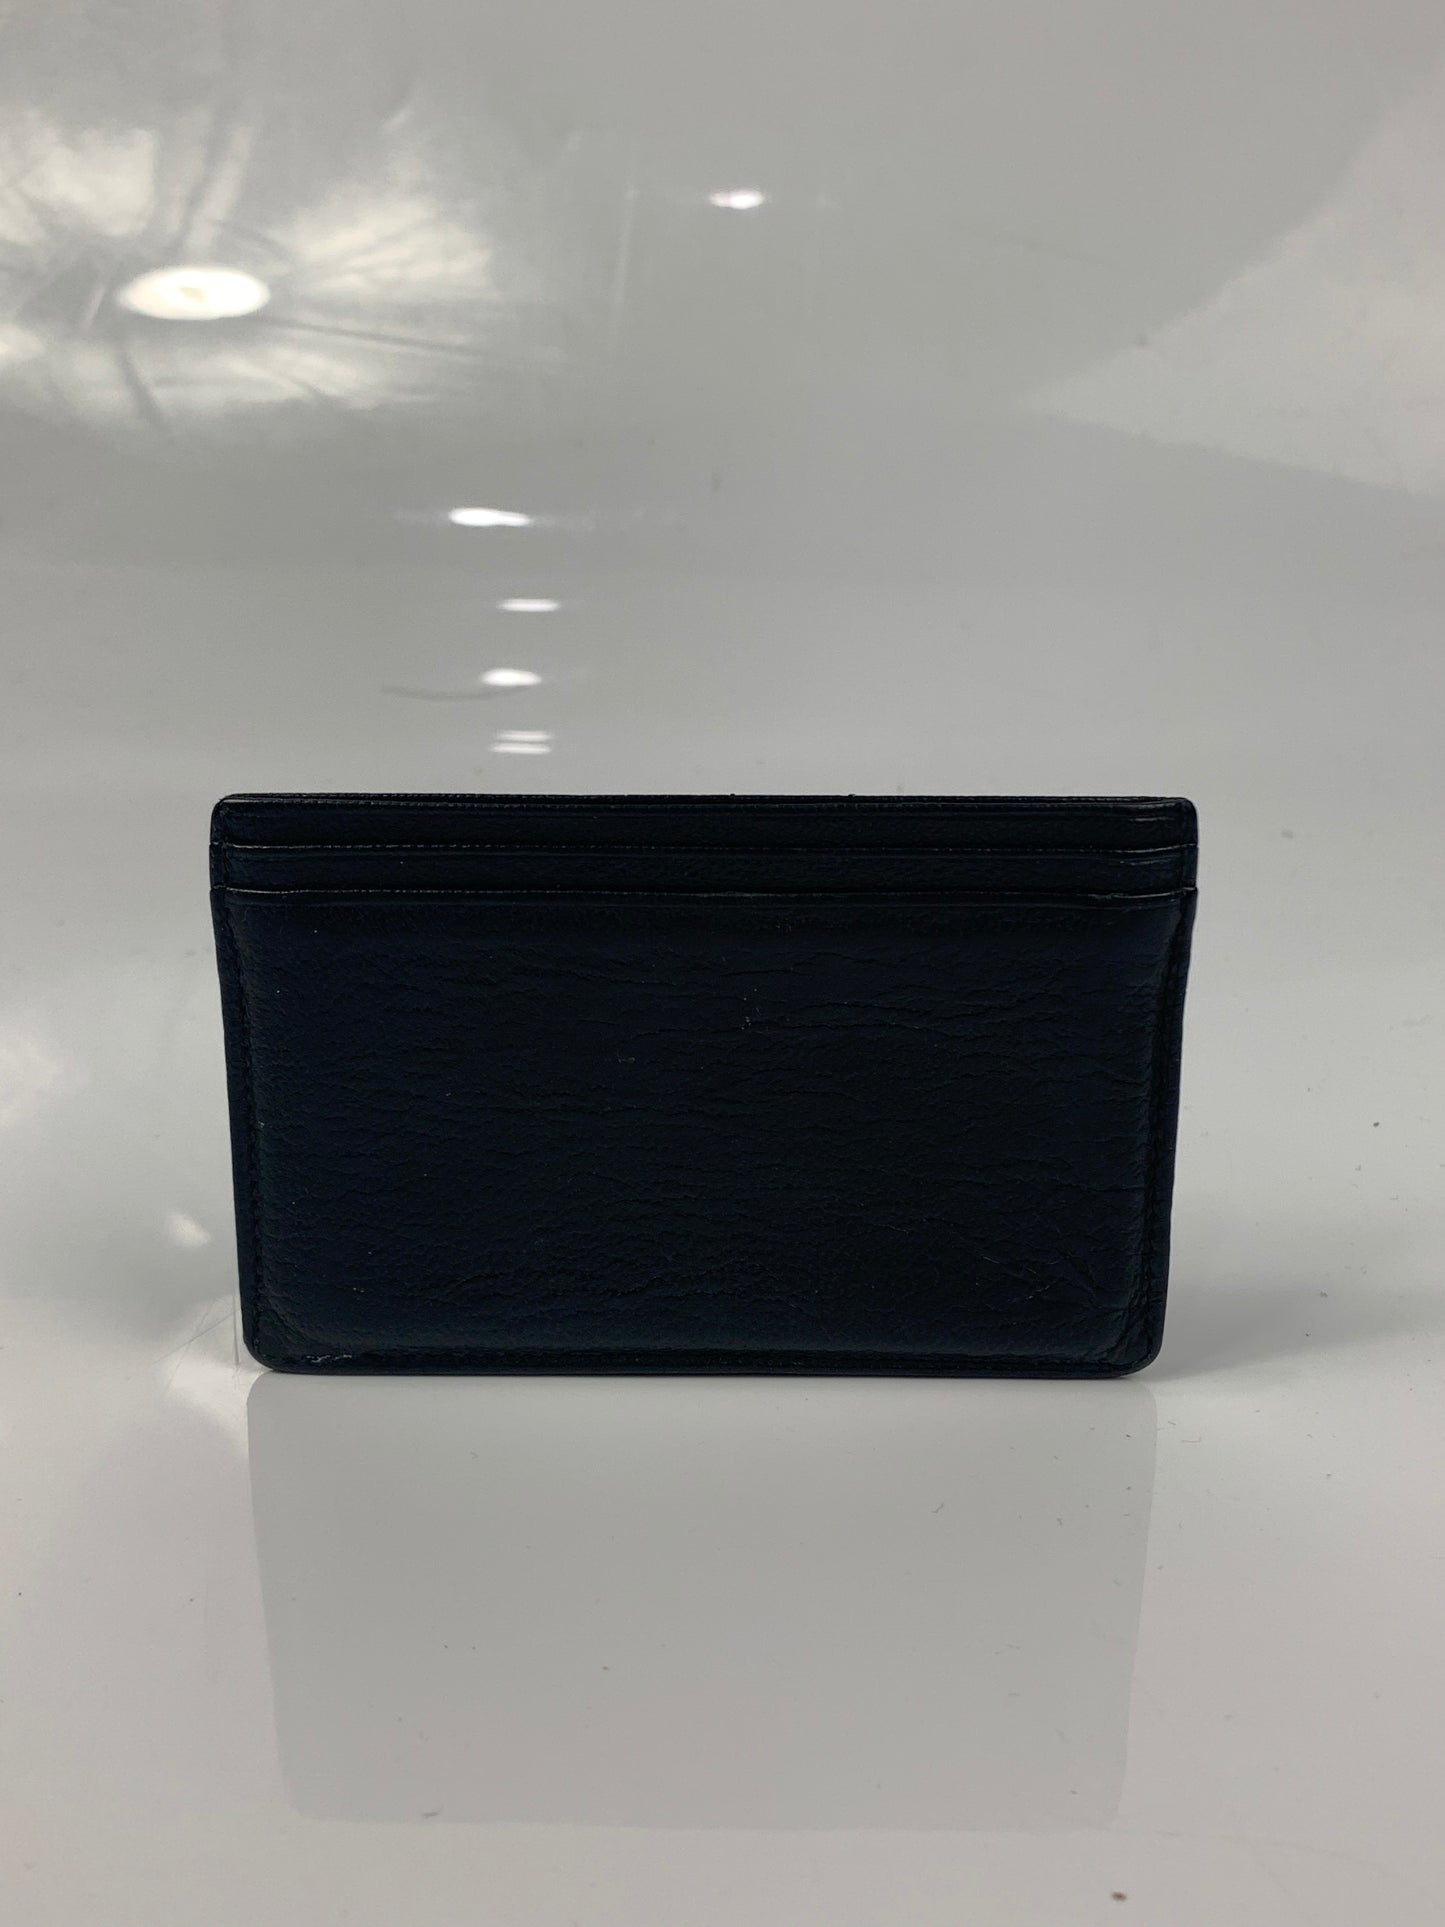 Chanel Classic Leather Patent Cardholder